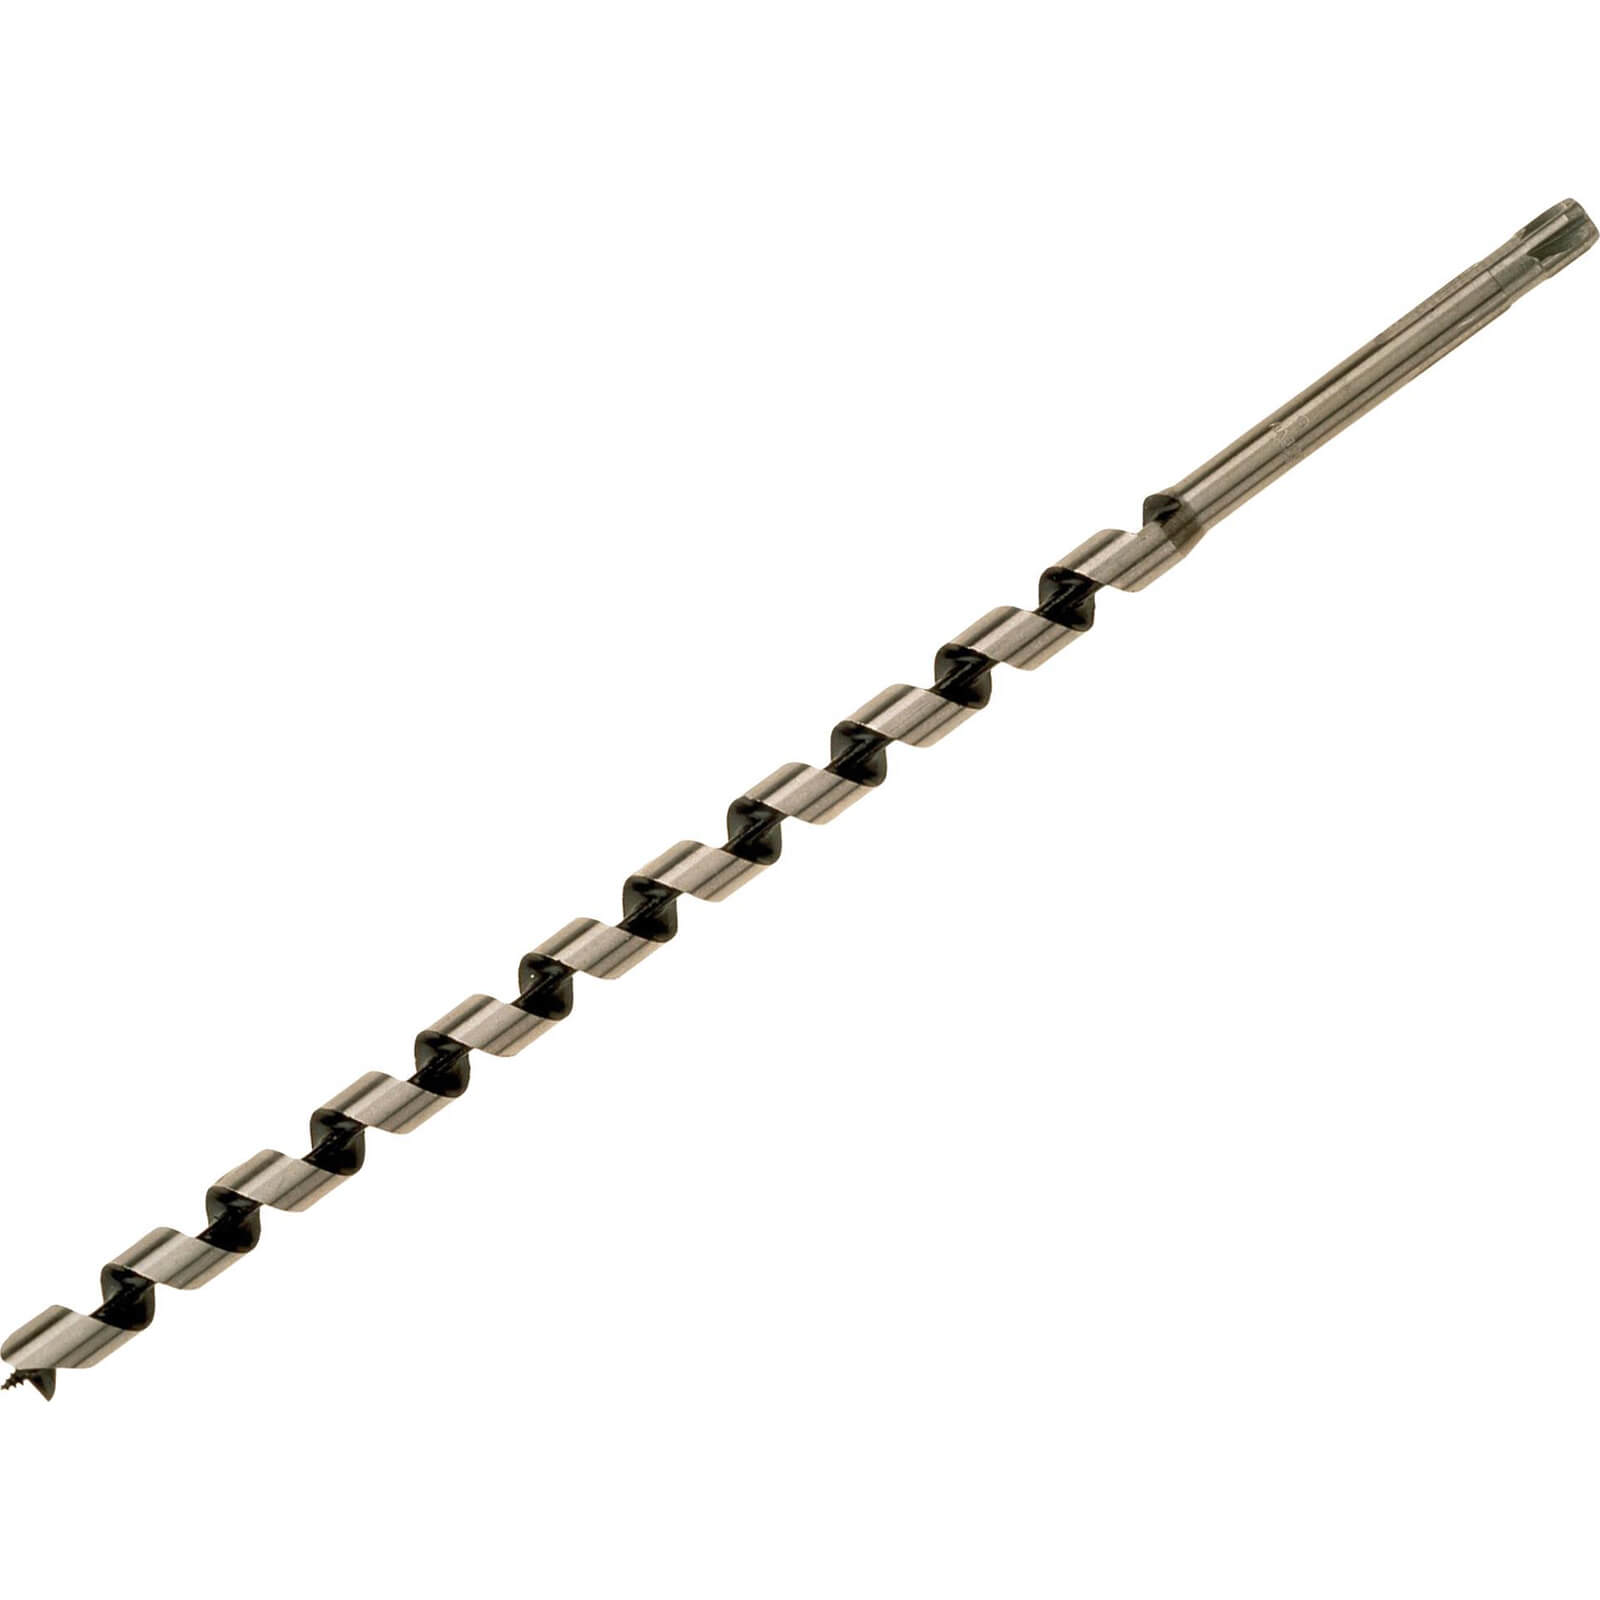 Photo of Bahco 9627 Series Long Combination Auger Drill Bit 14mm 460mm